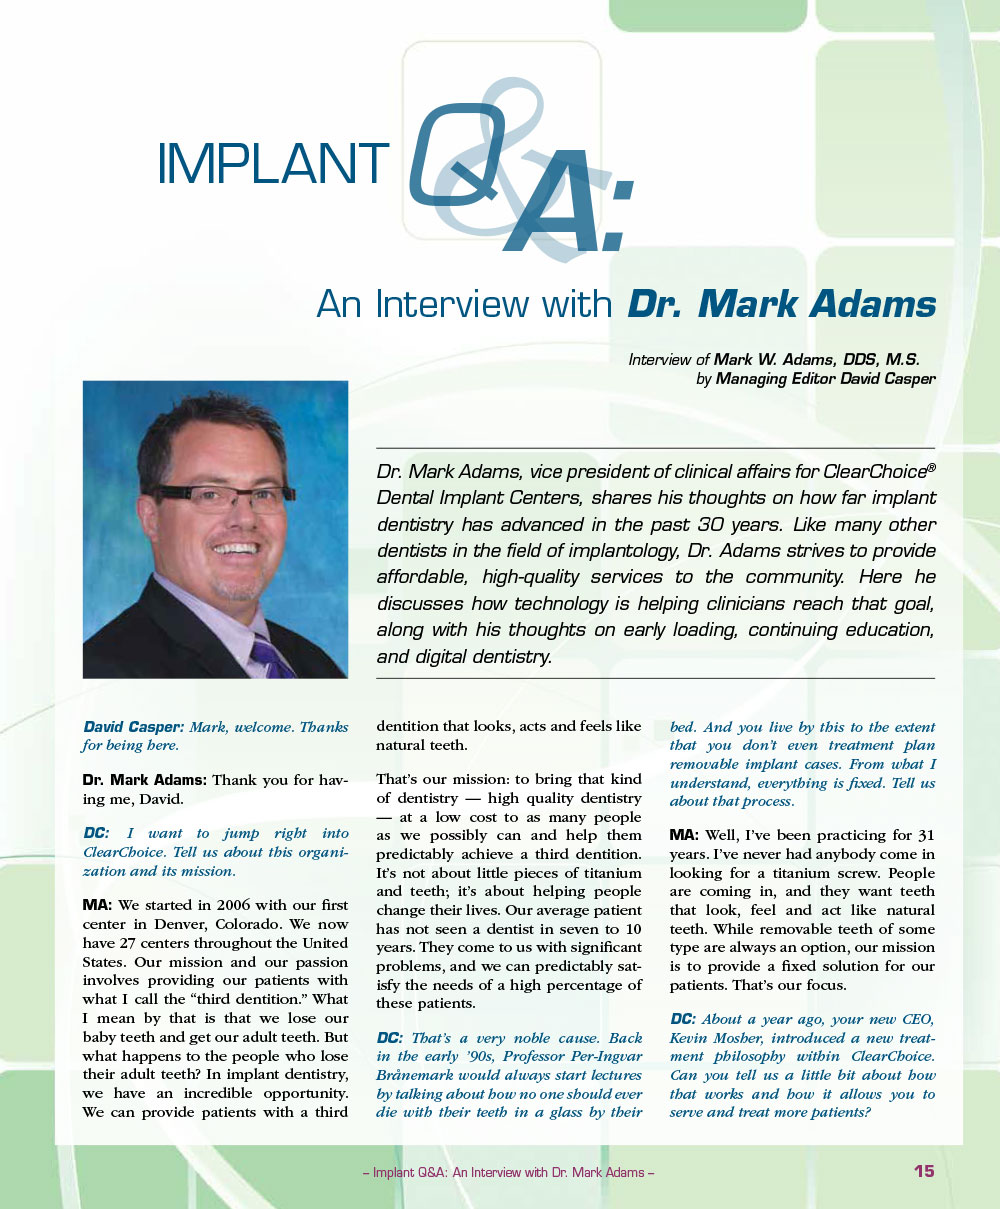 Implant Q & A: An Interview with Dr. Mark Adams